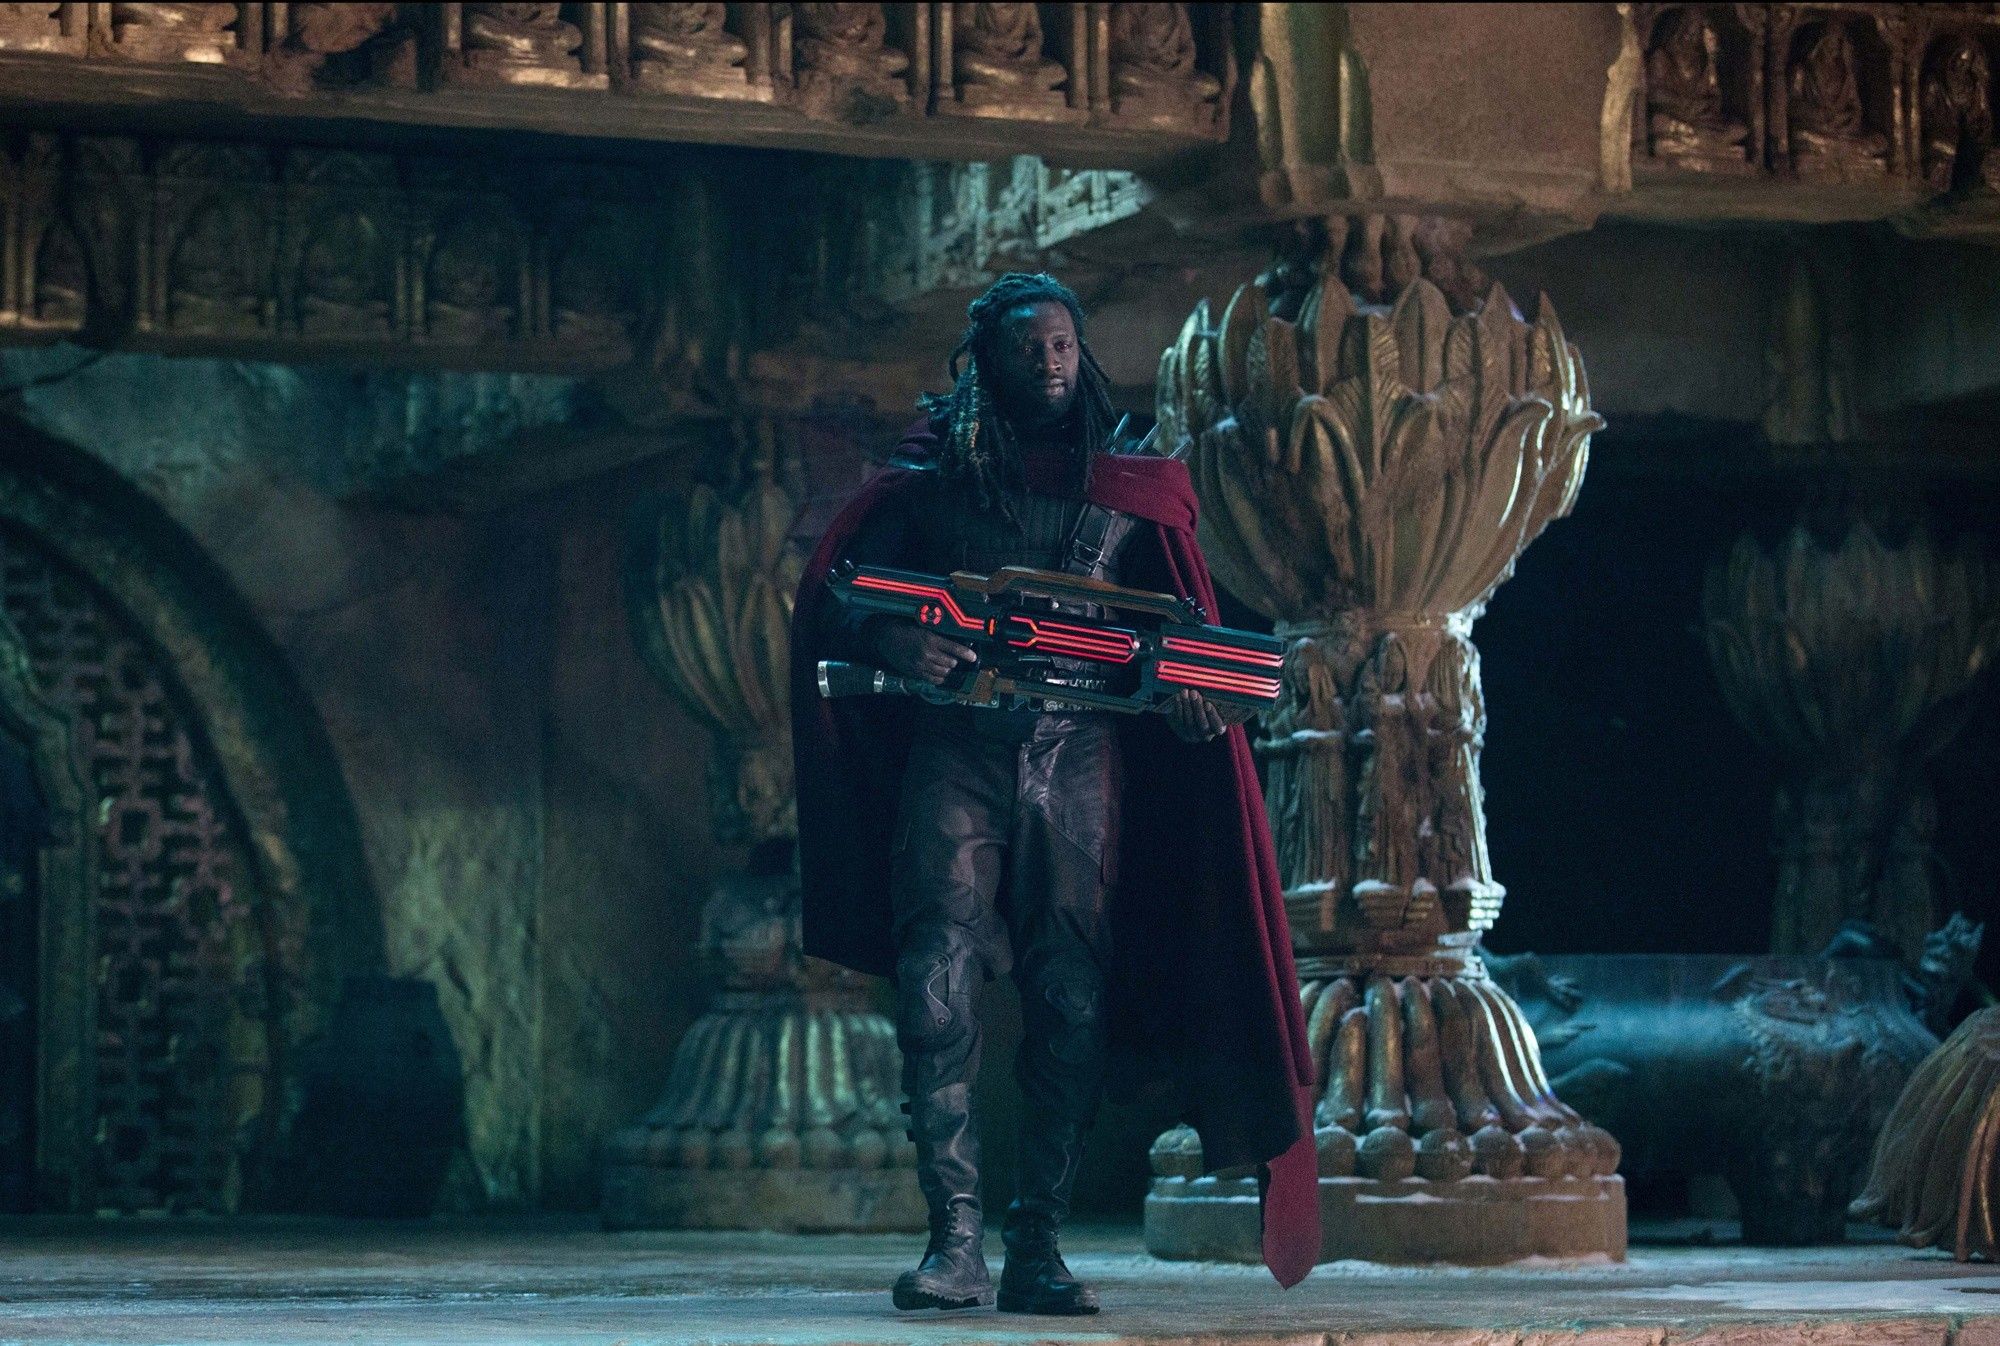 Omar Sy stars as Bishop in 20th Century Fox's X-Men: Days of Future Past (2014)